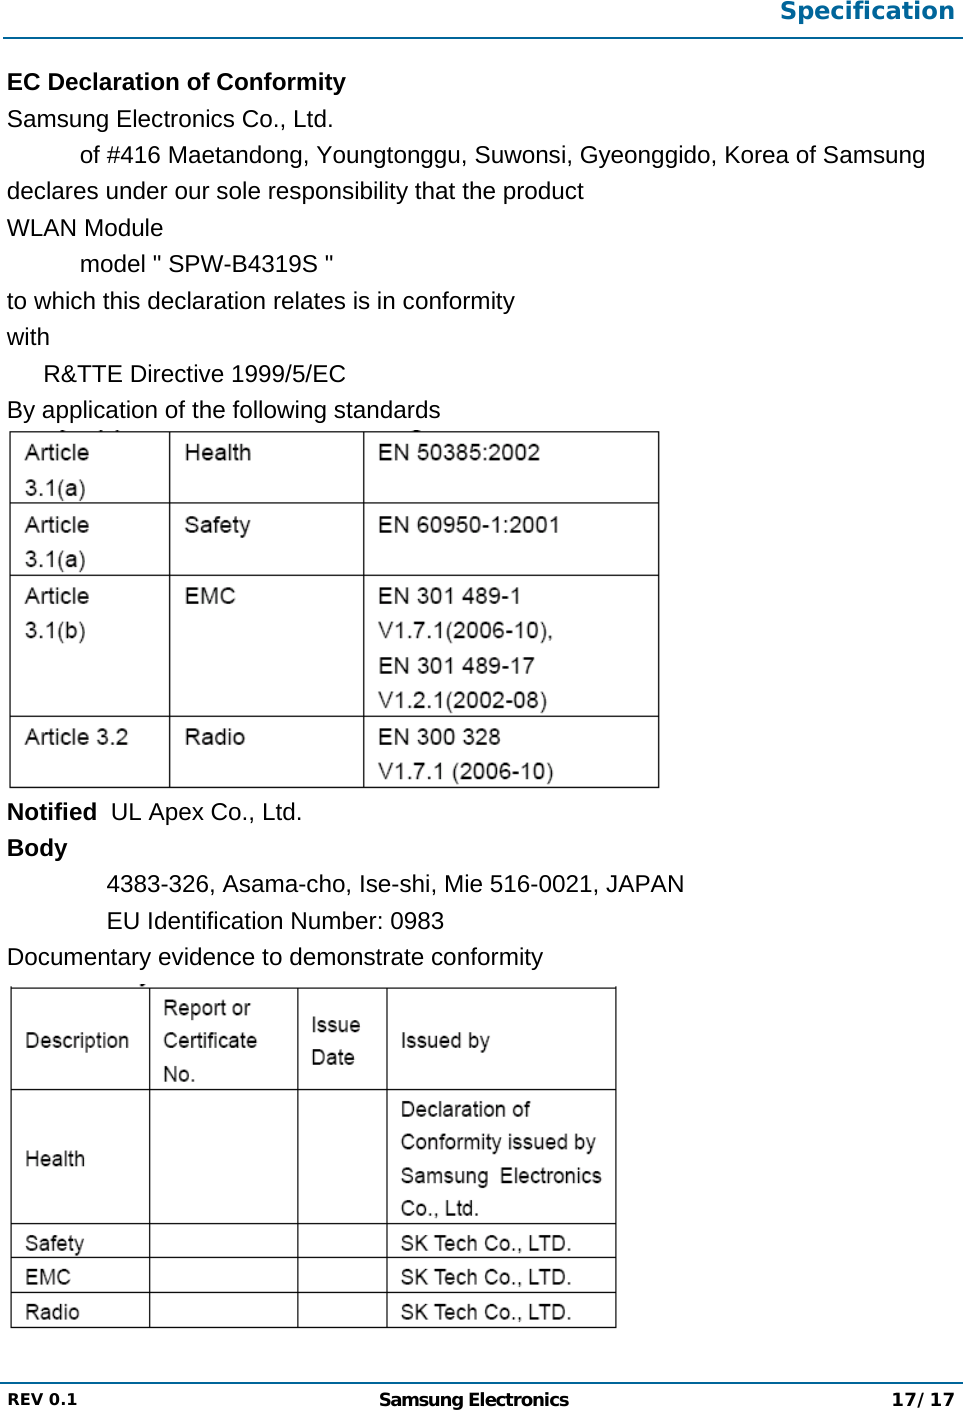  Specification  REV 0.1  Samsung Electronics 17/17  EC Declaration of Conformity Samsung Electronics Co., Ltd. of #416 Maetandong, Youngtonggu, Suwonsi, Gyeonggido, Korea of Samsung  declares under our sole responsibility that the product WLAN Module model &quot; SPW-B4319S &quot; to which this declaration relates is in conformity with R&amp;TTE Directive 1999/5/EC By application of the following standards  Notified  UL Apex Co., Ltd. Body 4383-326, Asama-cho, Ise-shi, Mie 516-0021, JAPAN EU Identification Number: 0983 Documentary evidence to demonstrate conformity  